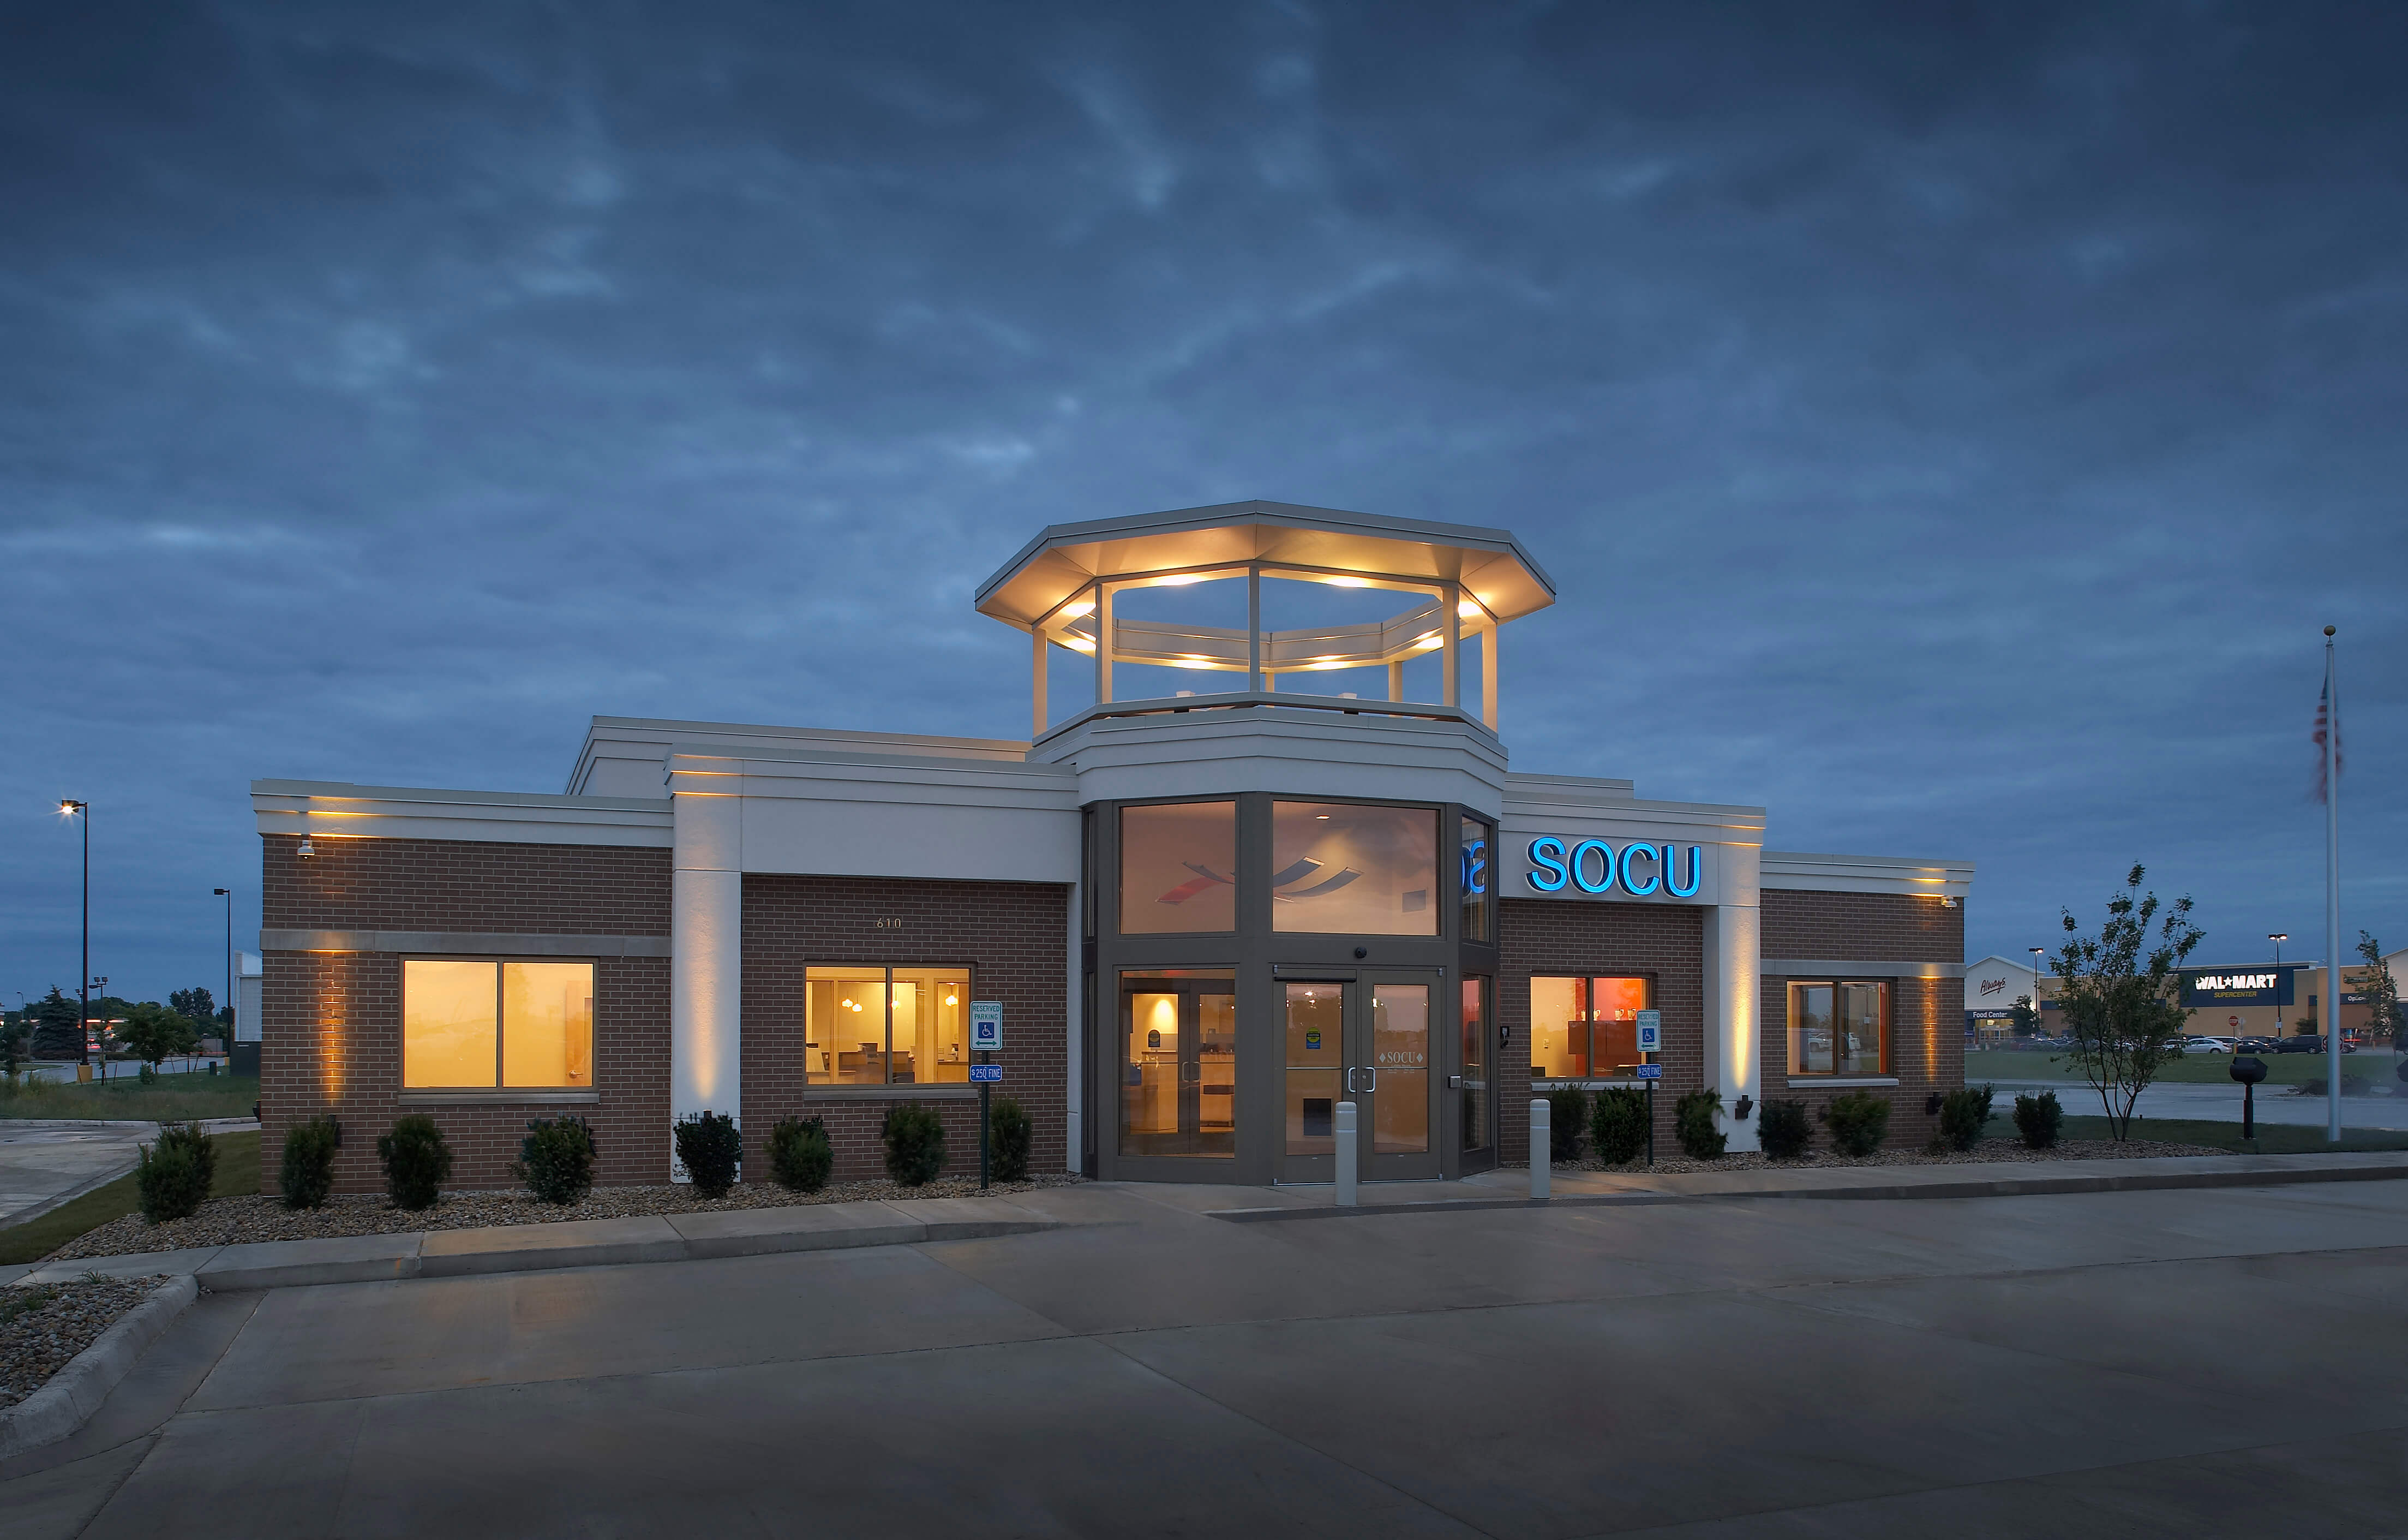 New Credit union branch in Illinois